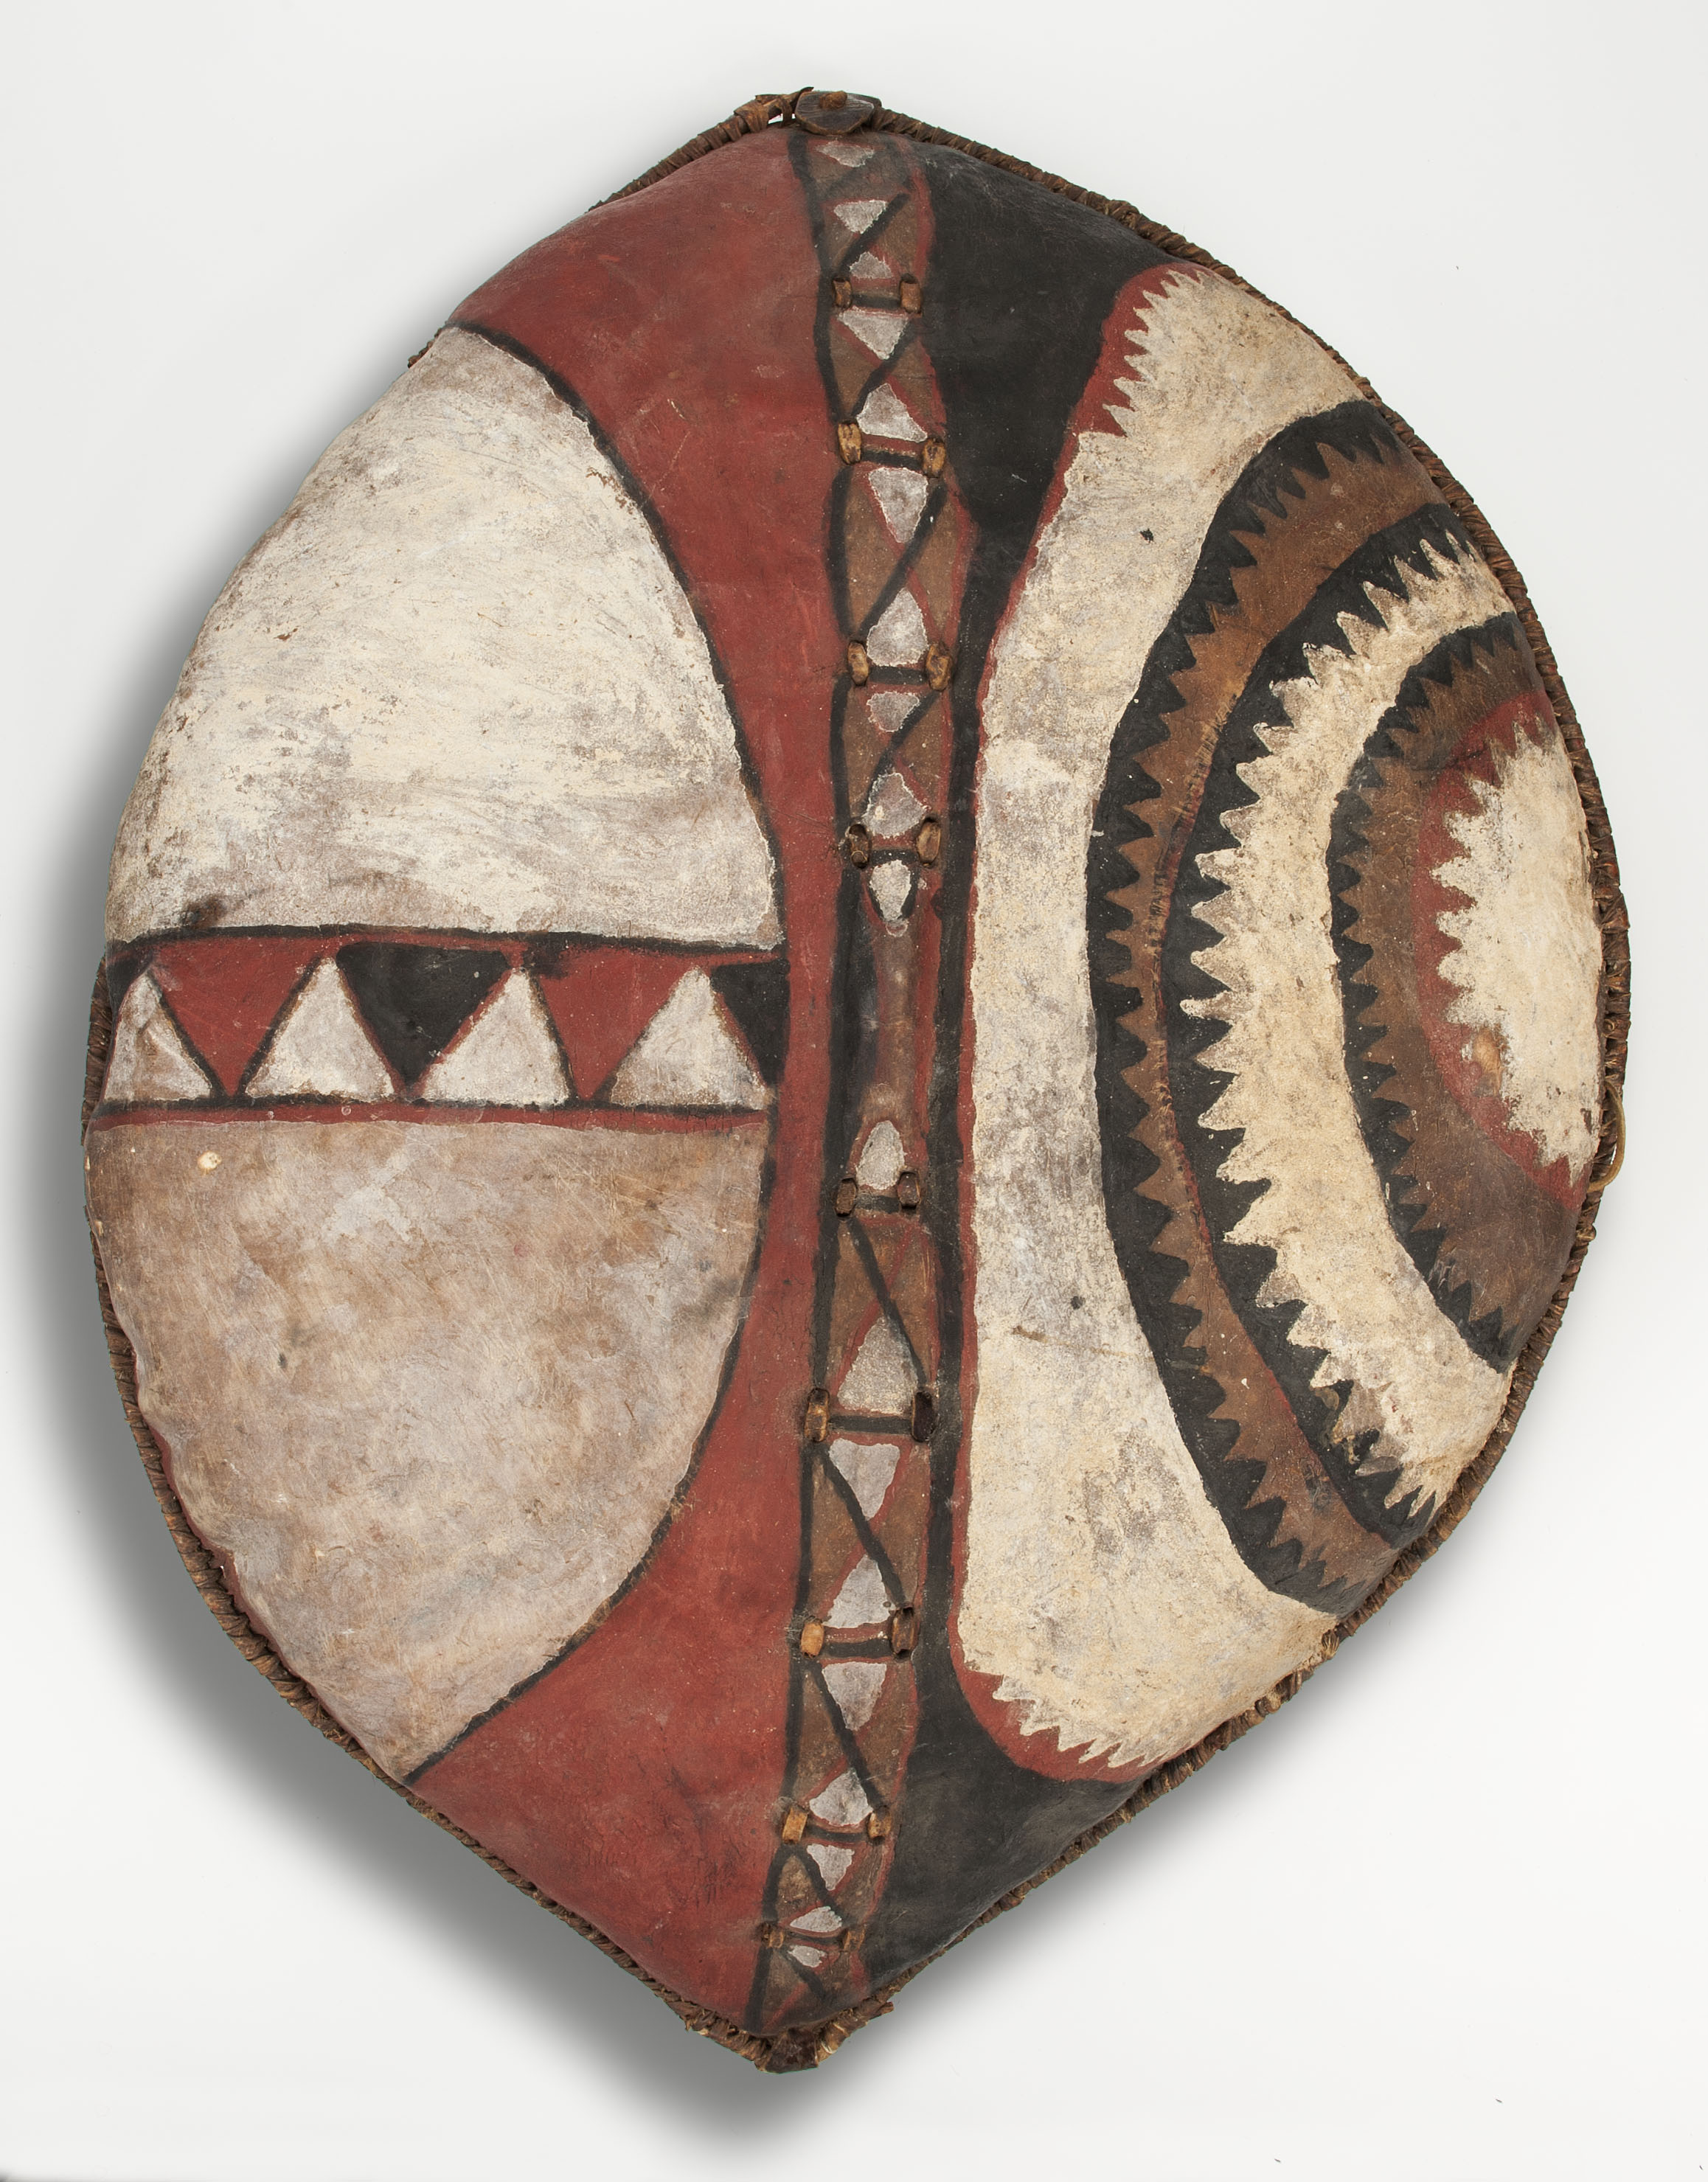 Shield by Unknown Artist - collected near Narok in 1977 - 94 x 72.4 cm Indiana University Art Museum